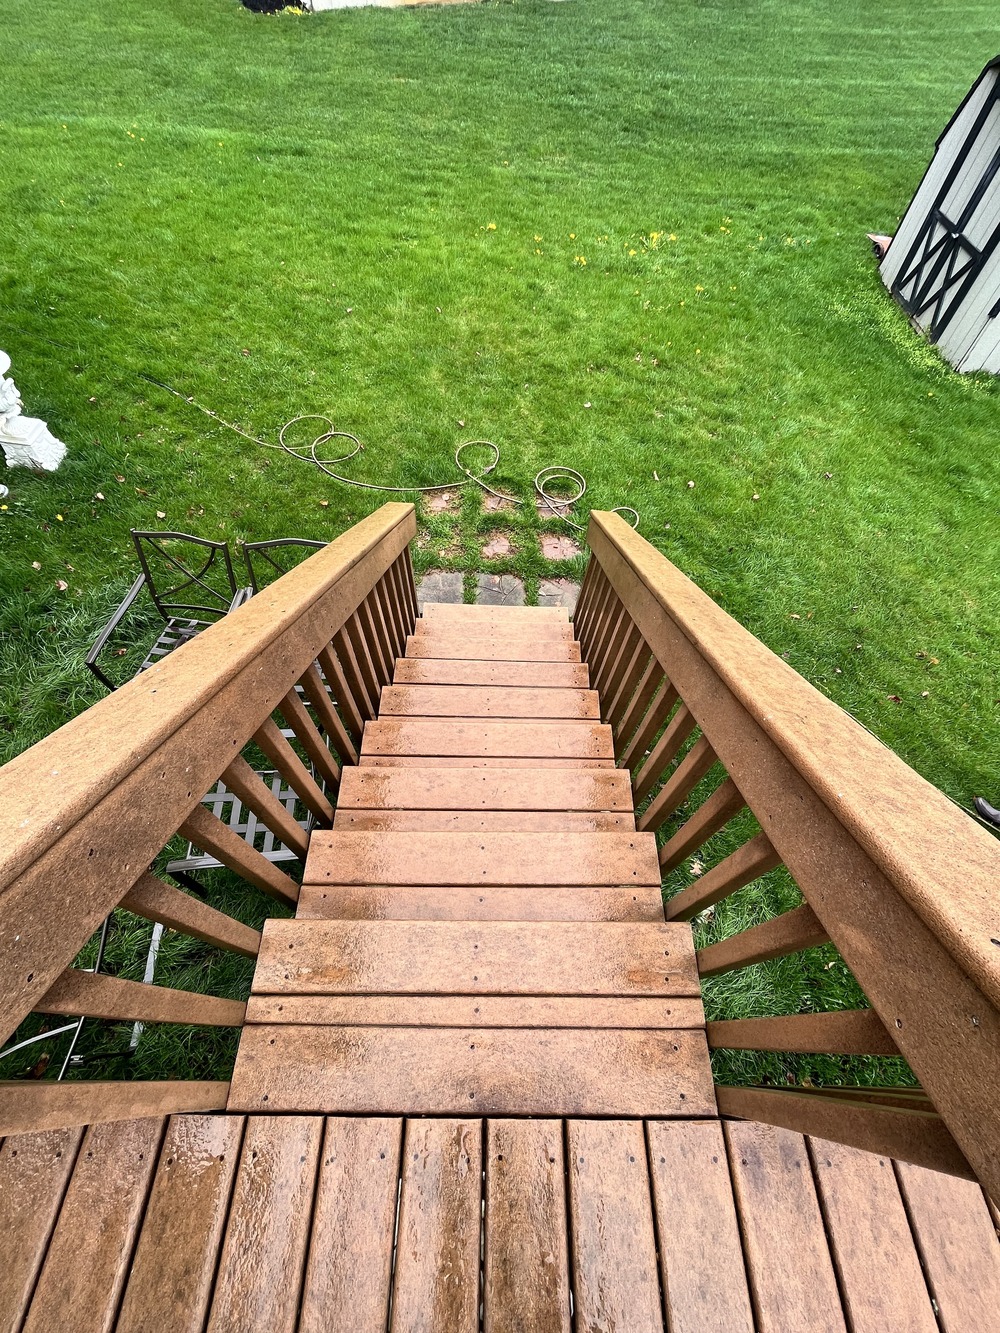 Deck Cleaning In Bethlehem, PA